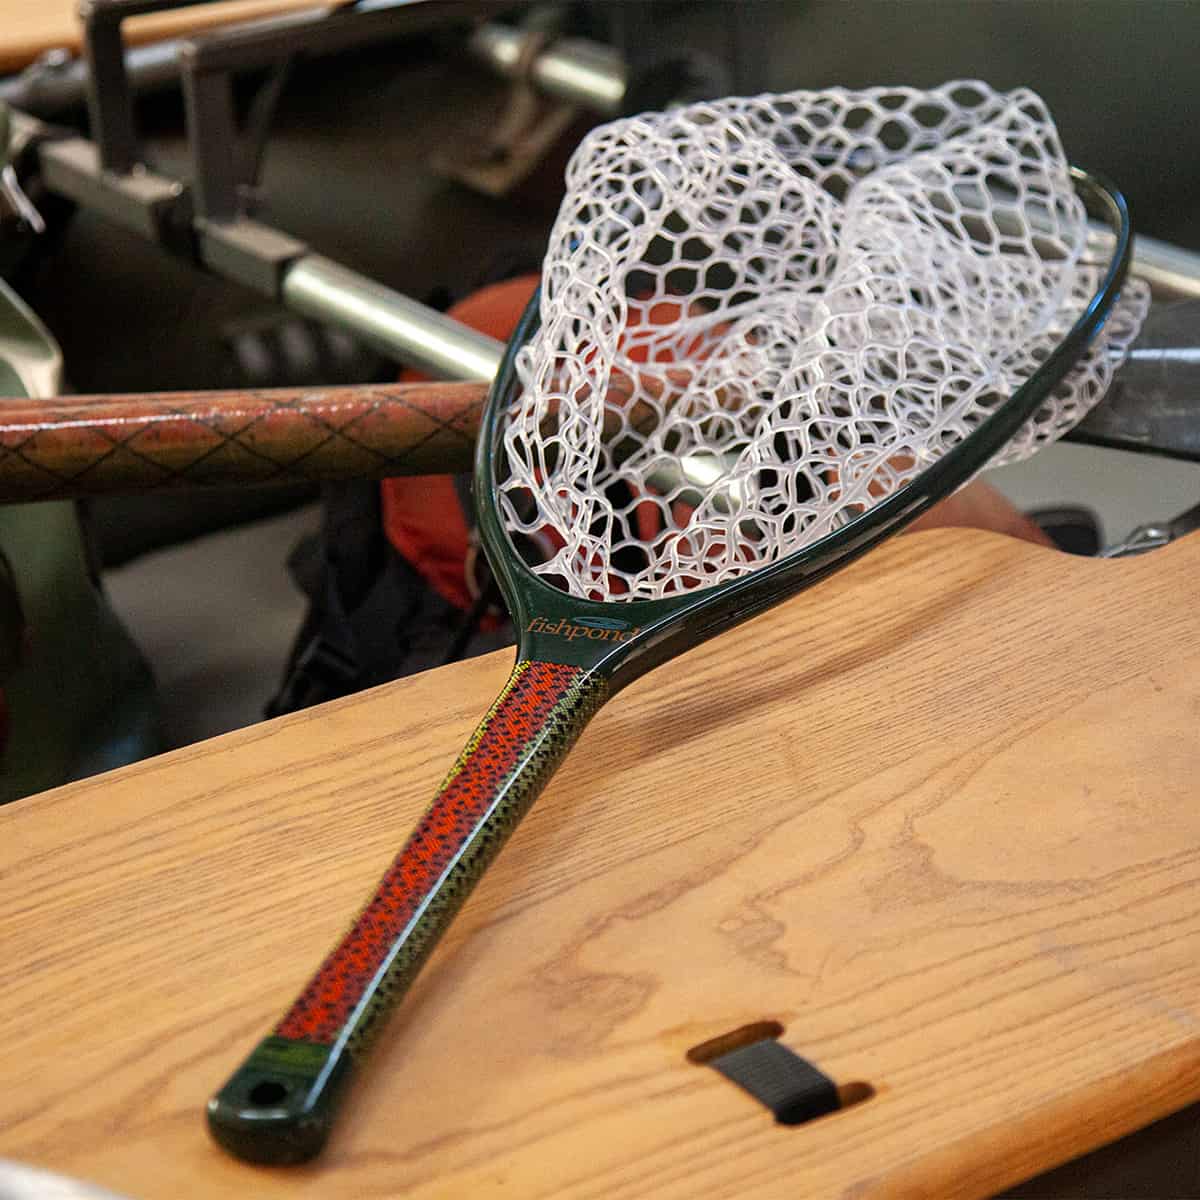 Fishpond Nomad Carbon Fiber Net - Fly Fishing Accessories - Farlows